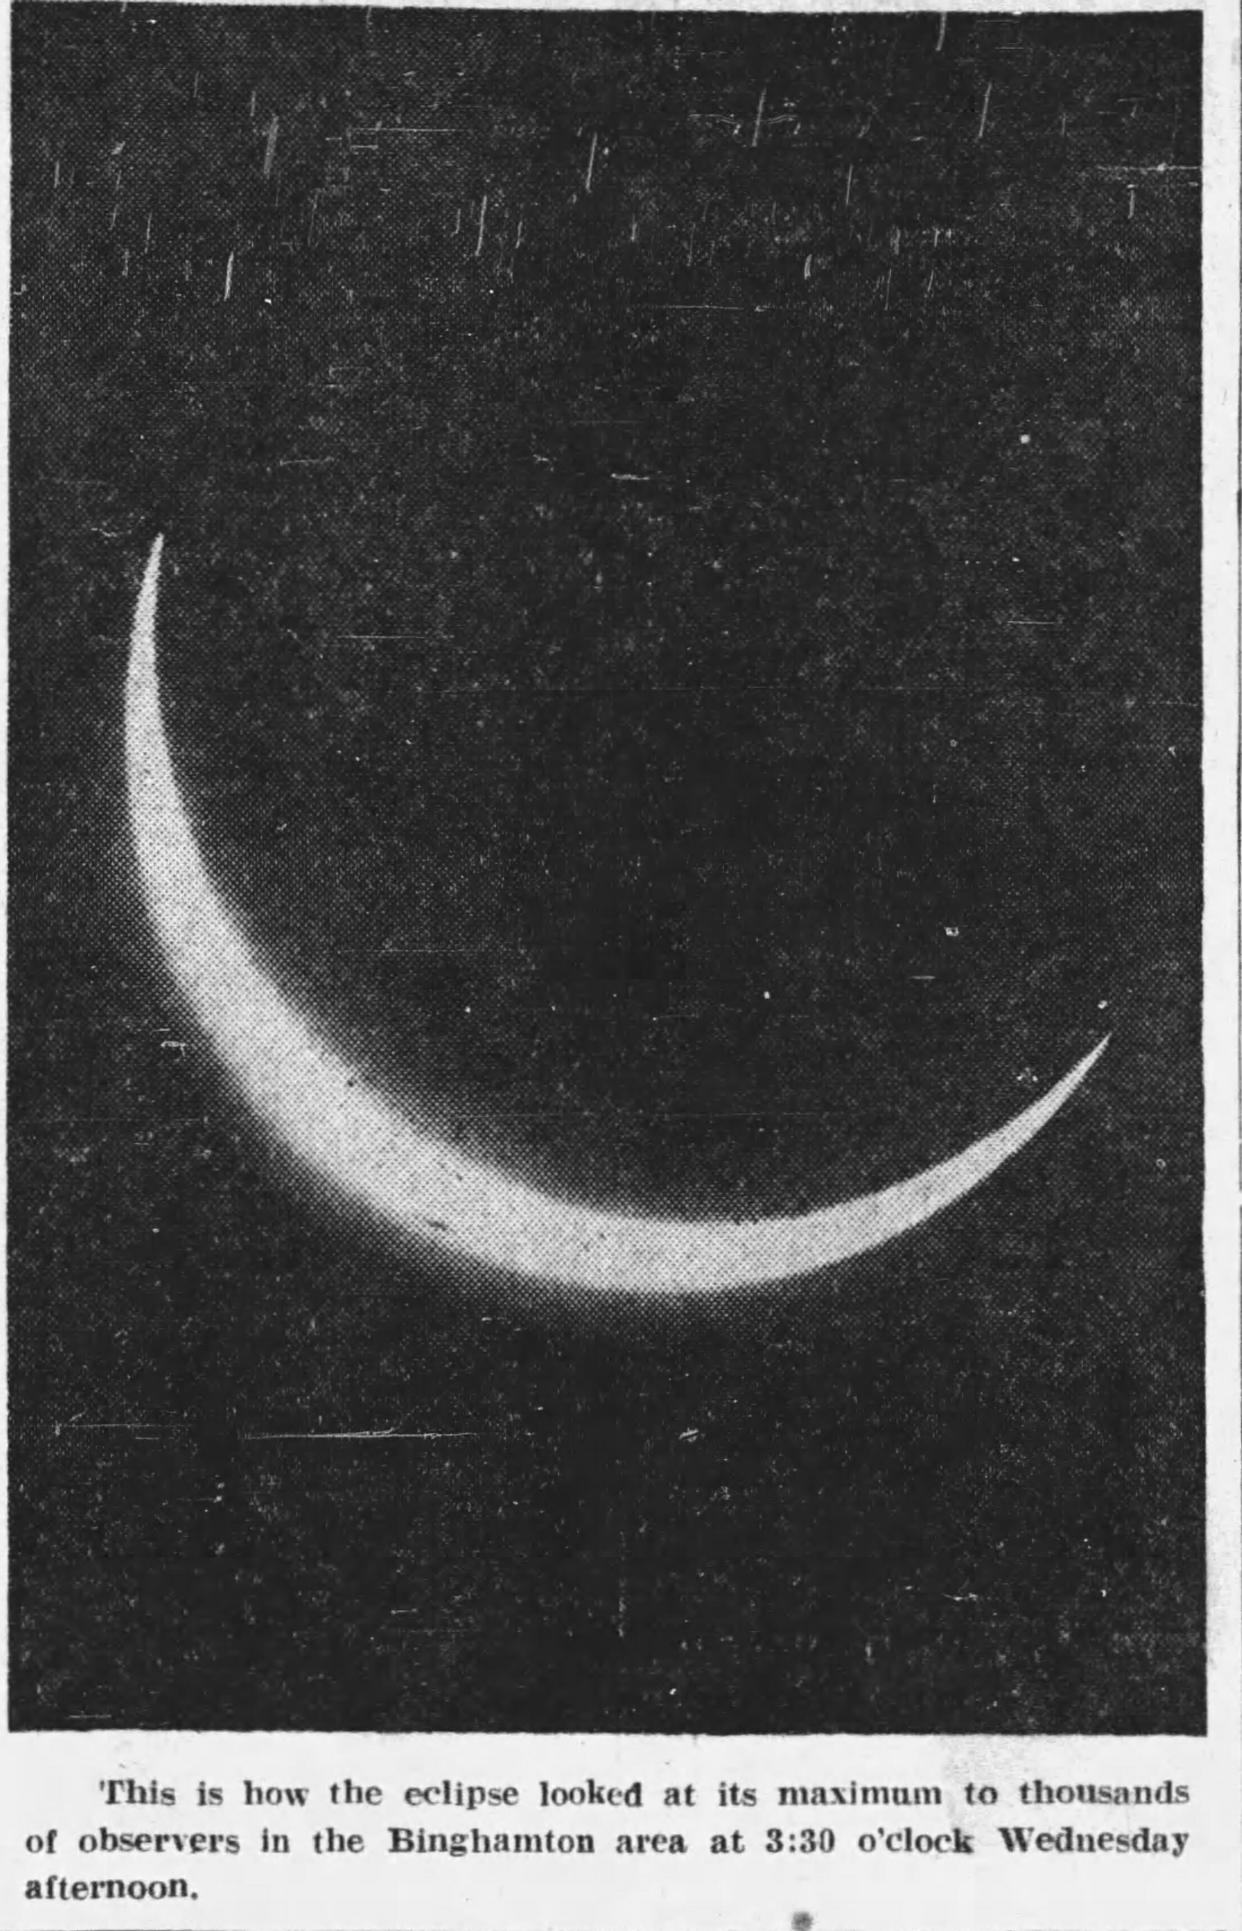 The last remnant of the sun as photographed in 1932 from a plane above the ground.